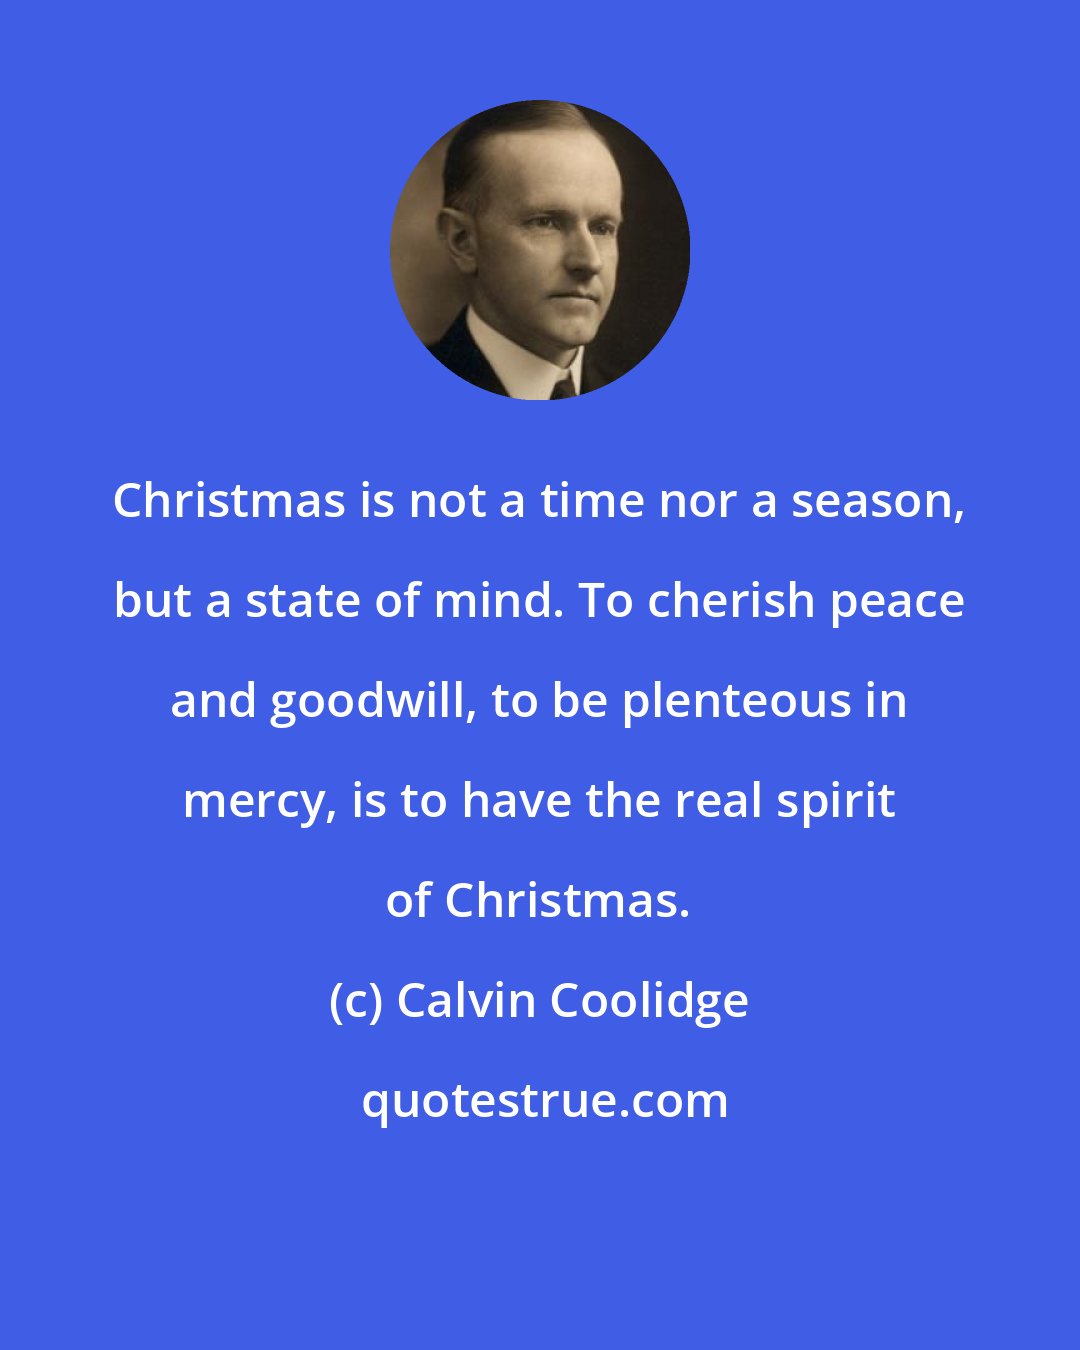 Calvin Coolidge: Christmas is not a time nor a season, but a state of mind. To cherish peace and goodwill, to be plenteous in mercy, is to have the real spirit of Christmas.